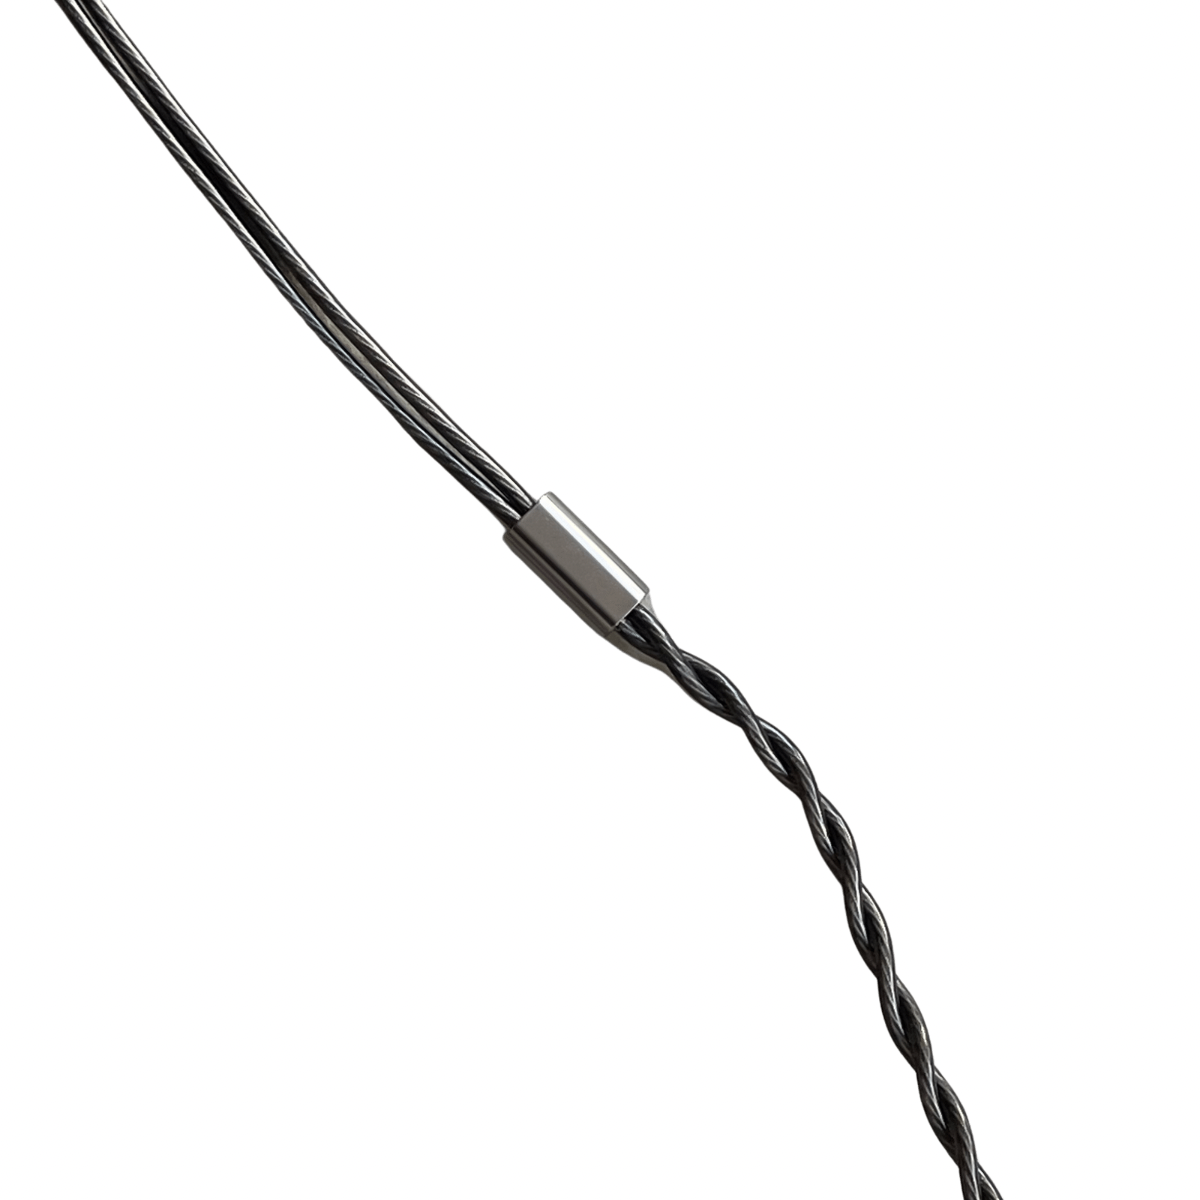 EarAudio IEM Cable With Boom Microphone